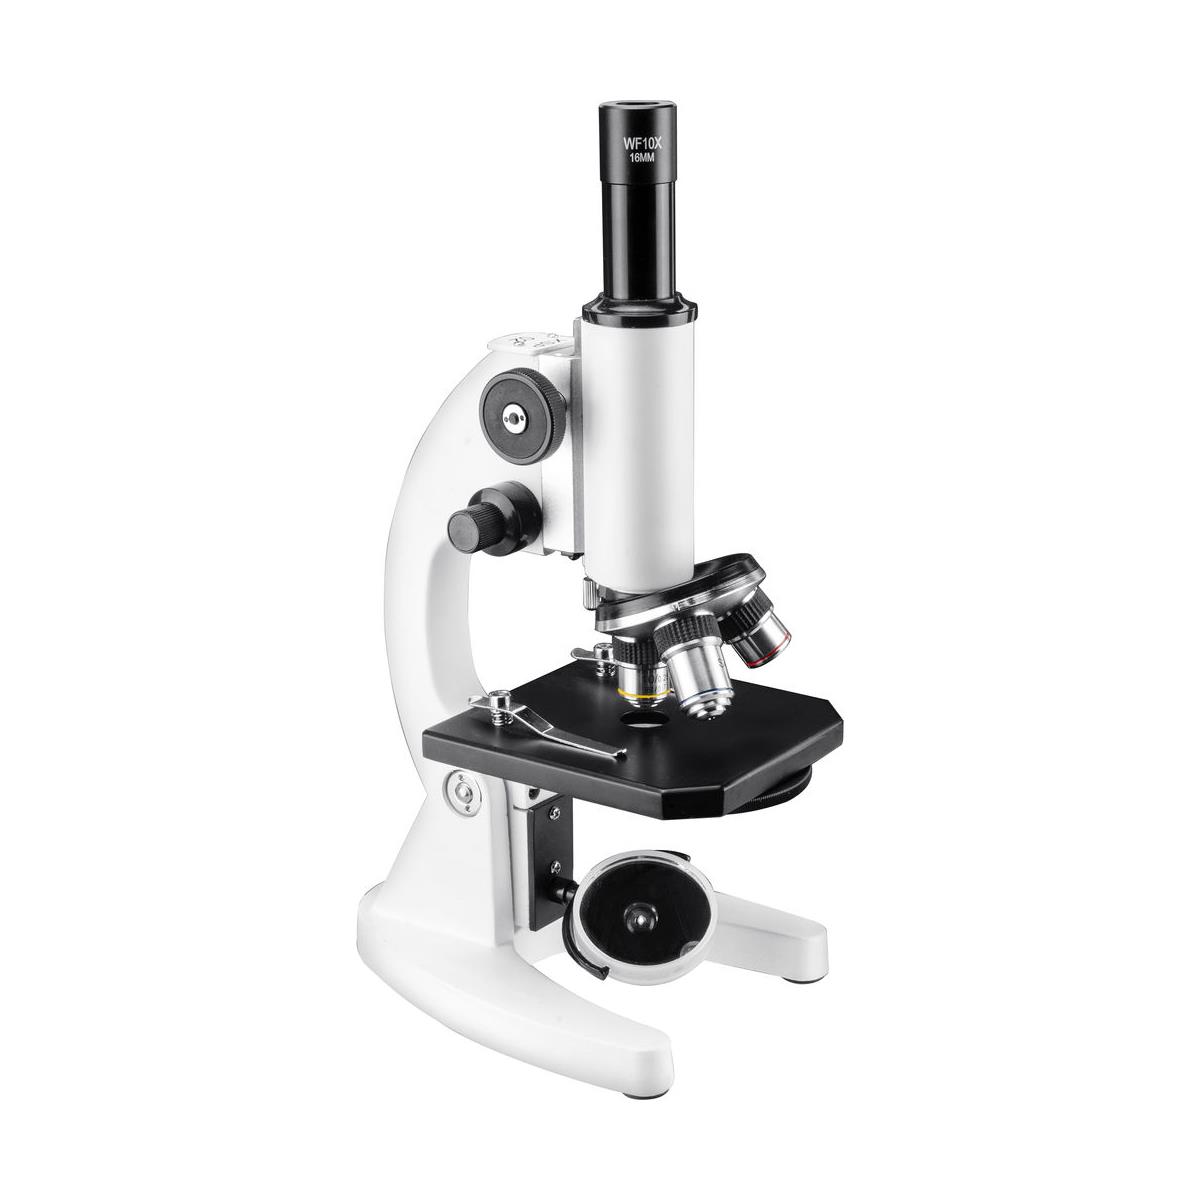 

Barska Monocular Compound Microscope with 40x, 100x and 400x Magnification